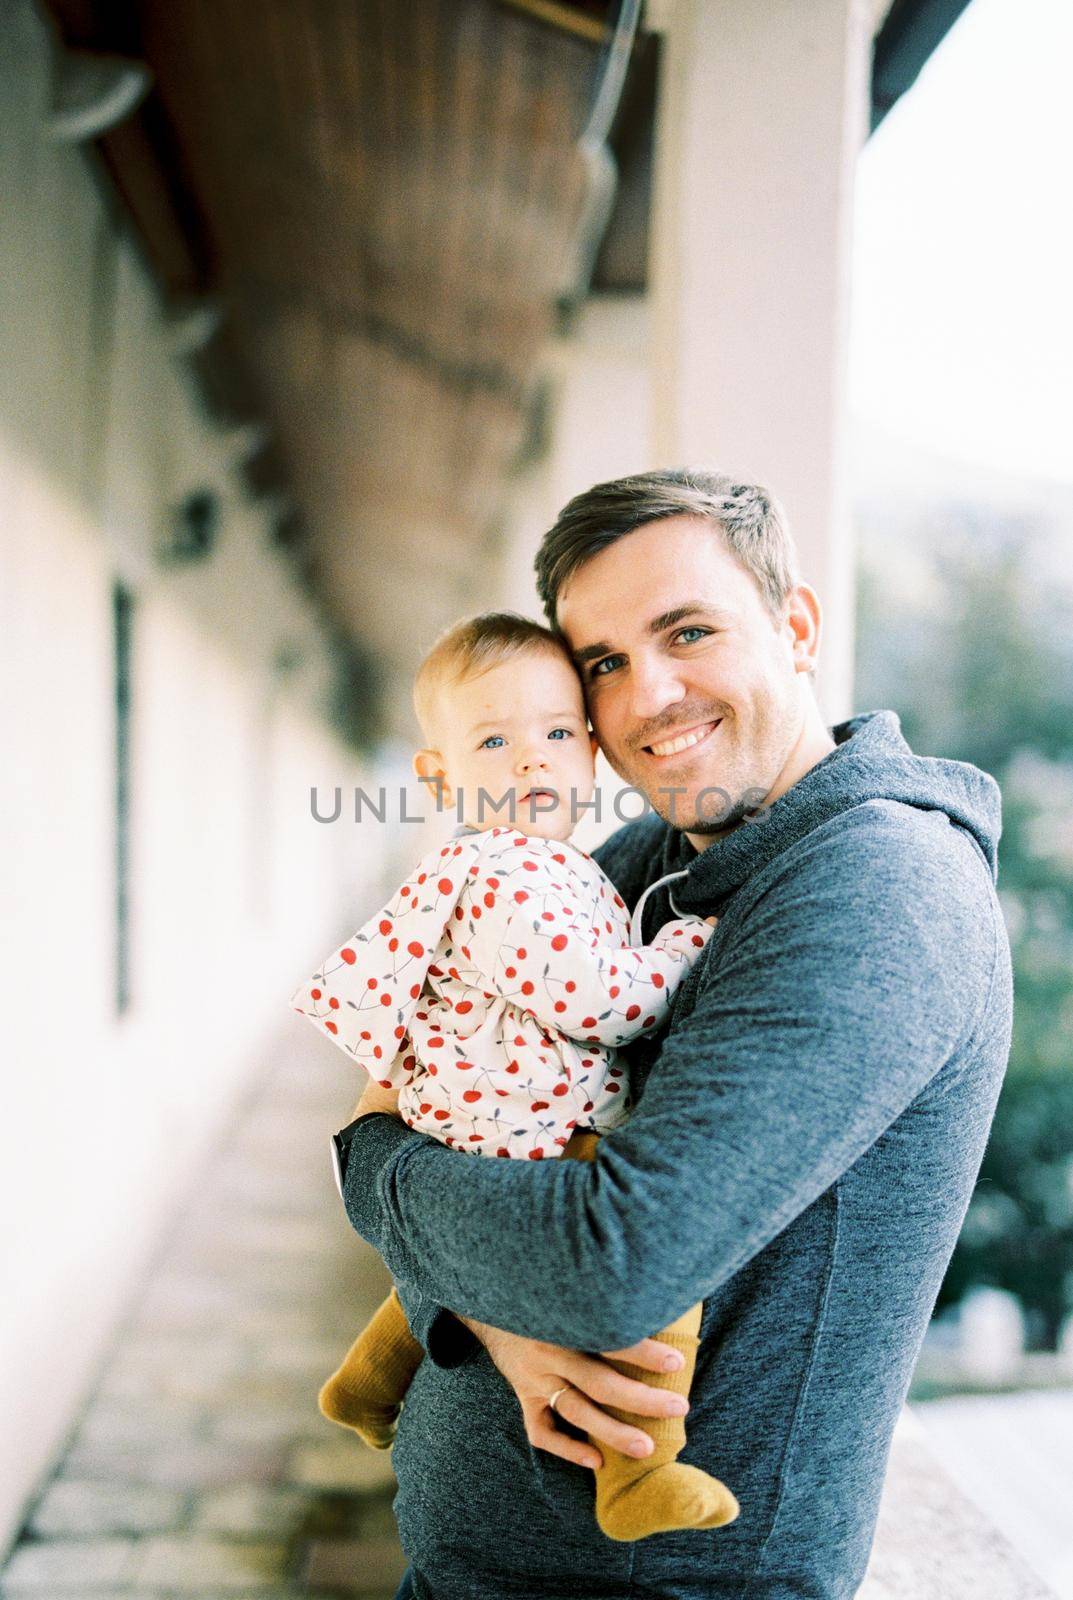 Smiling dad with a baby in his arms stands on the terrace. Portrait by Nadtochiy